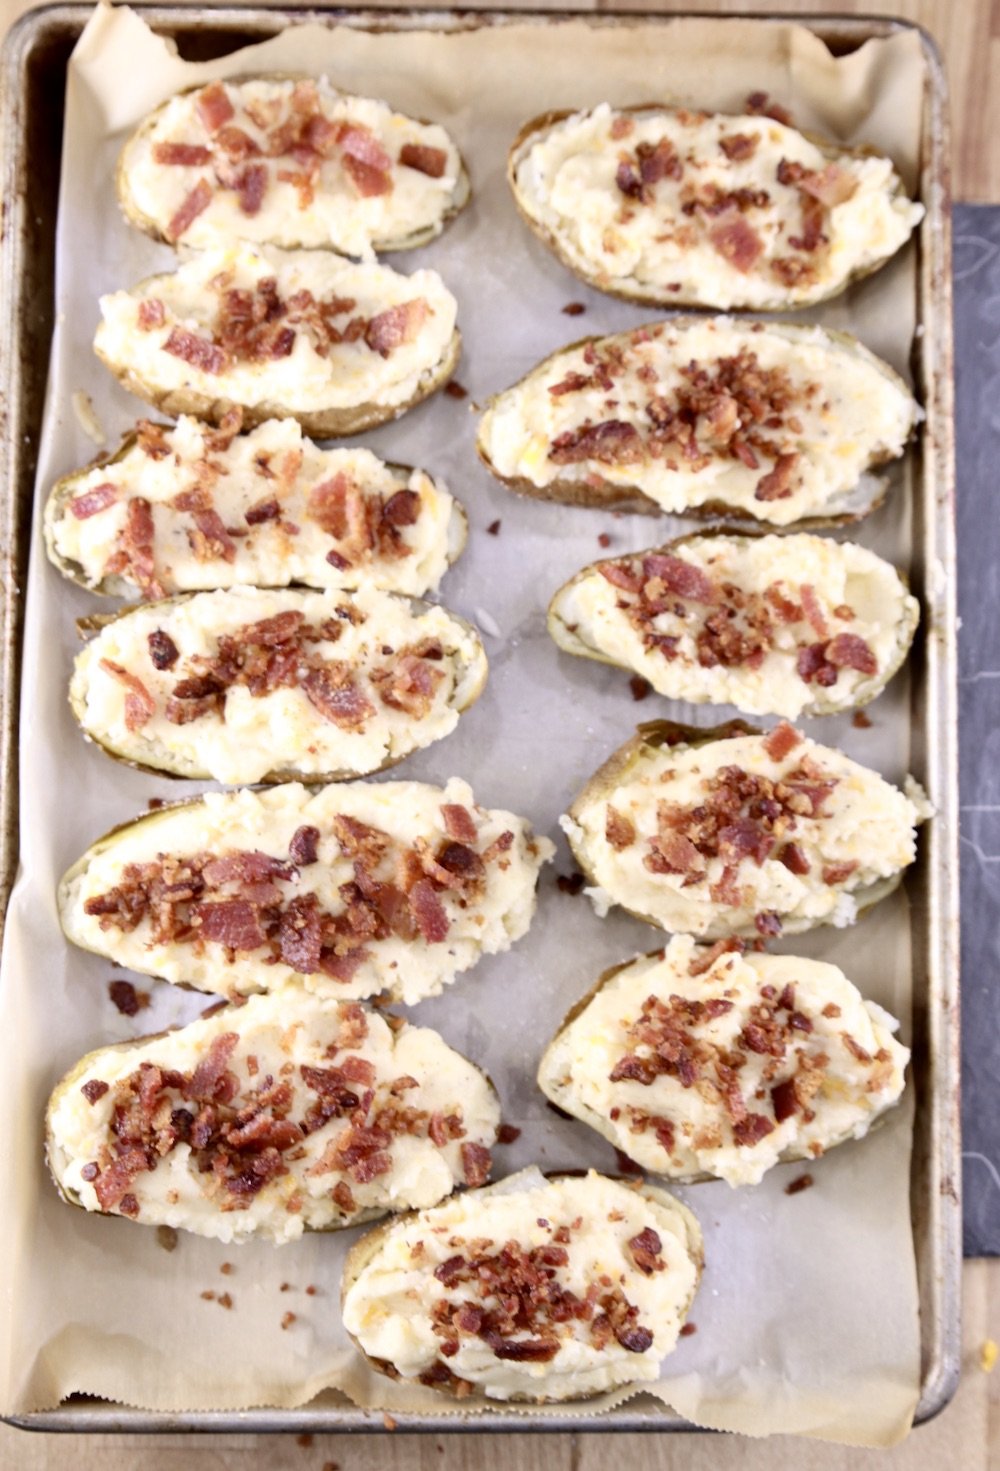 Half Baked Potatoes filled with potato and cheese mixture topped with bacon on a baking sheet